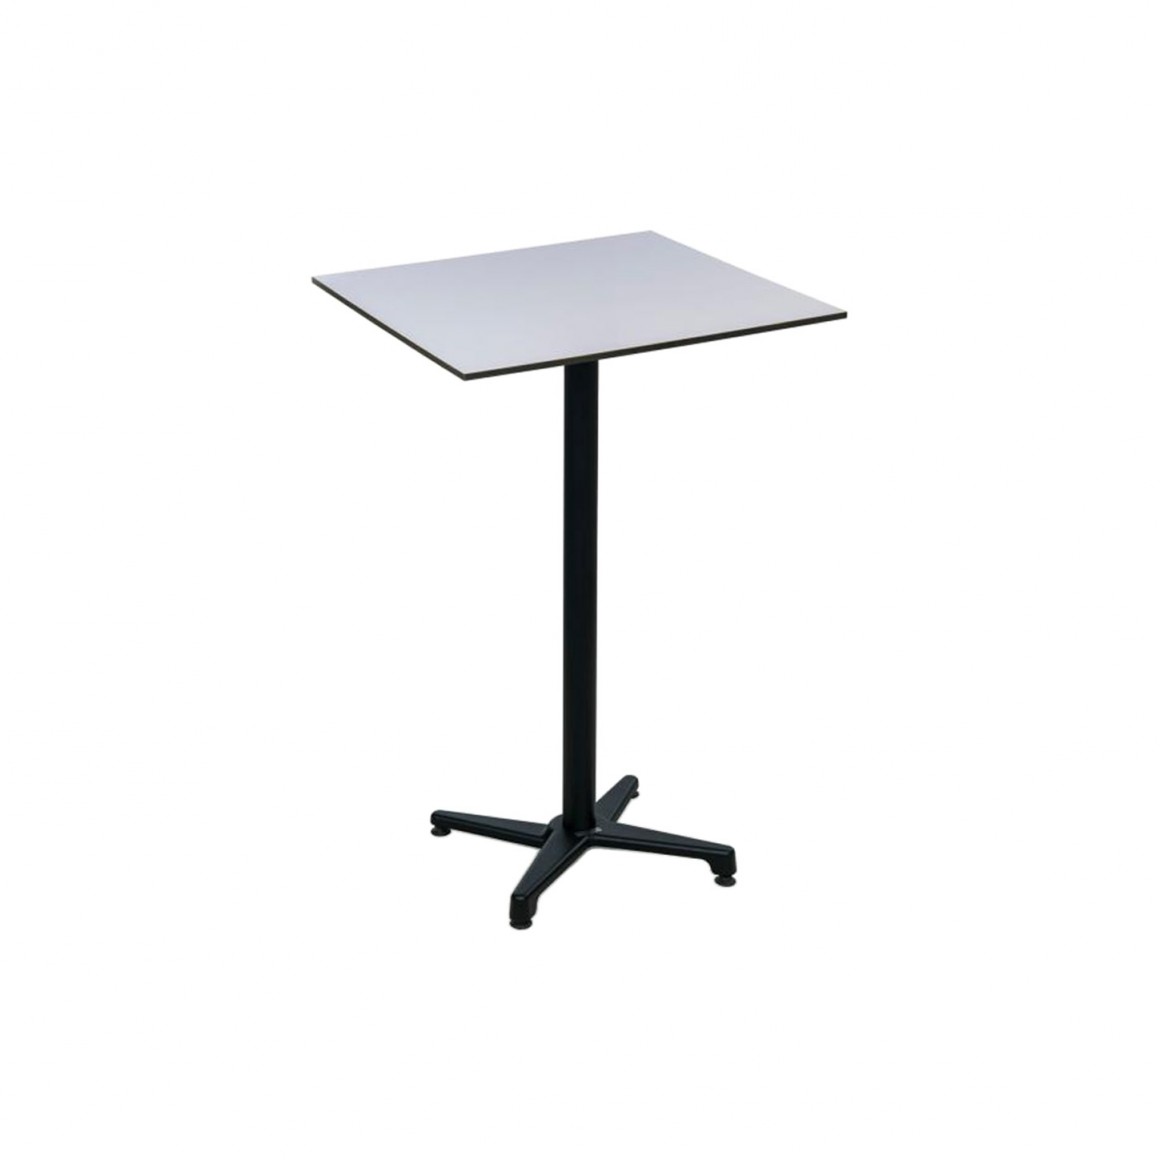 Table: 25mm laminate table top with black PVC edged, stainless steel folding table leg